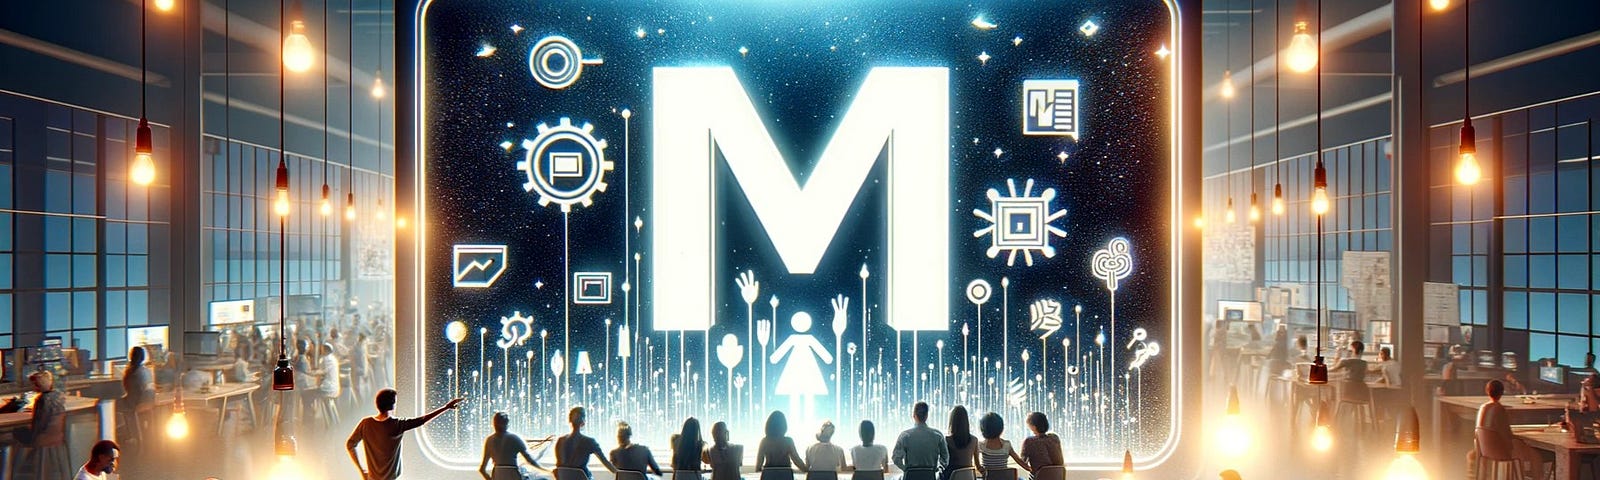 A diverse group of people is gathered around a glowing screen displaying the Medium logo in a modern, creative workspace. The atmosphere is energetic, filled with engagement and discussion, symbolizing the collaborative spirit of Medium.